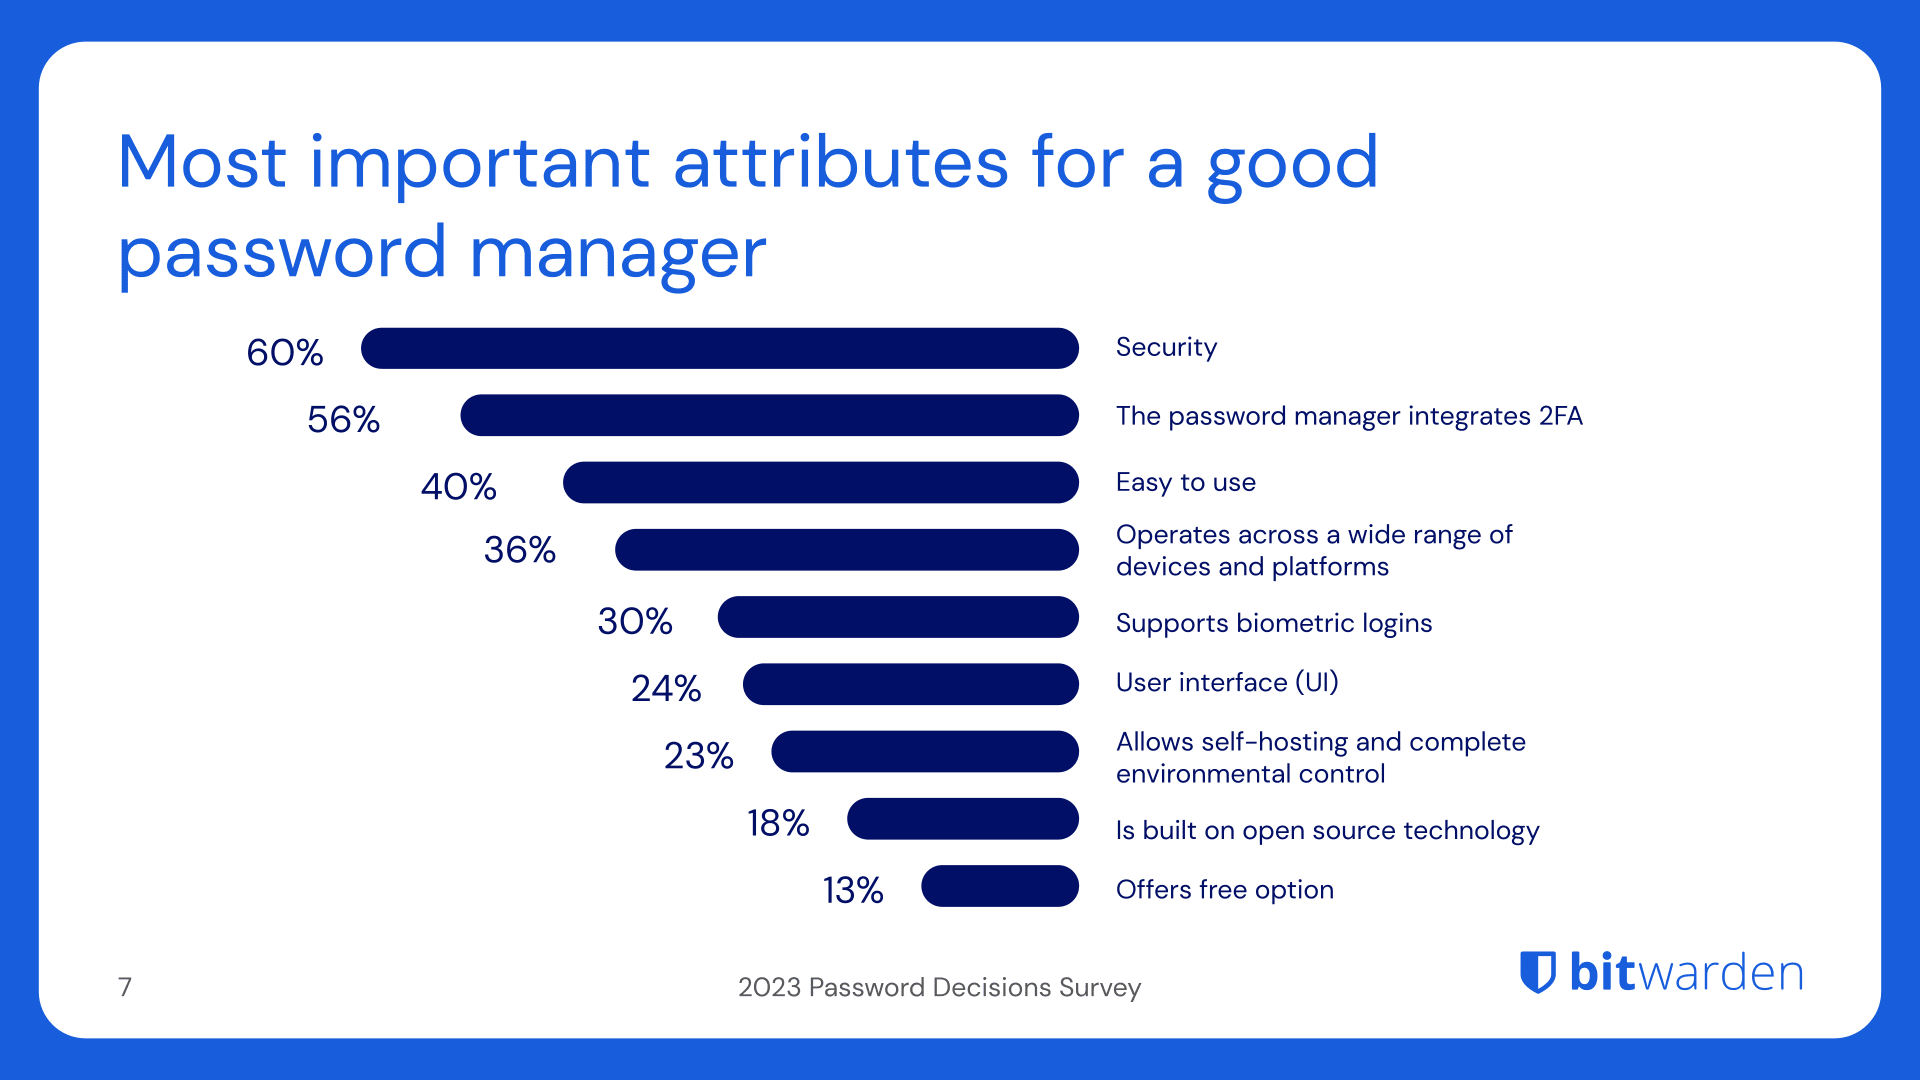 Most important attributes for a good password manager